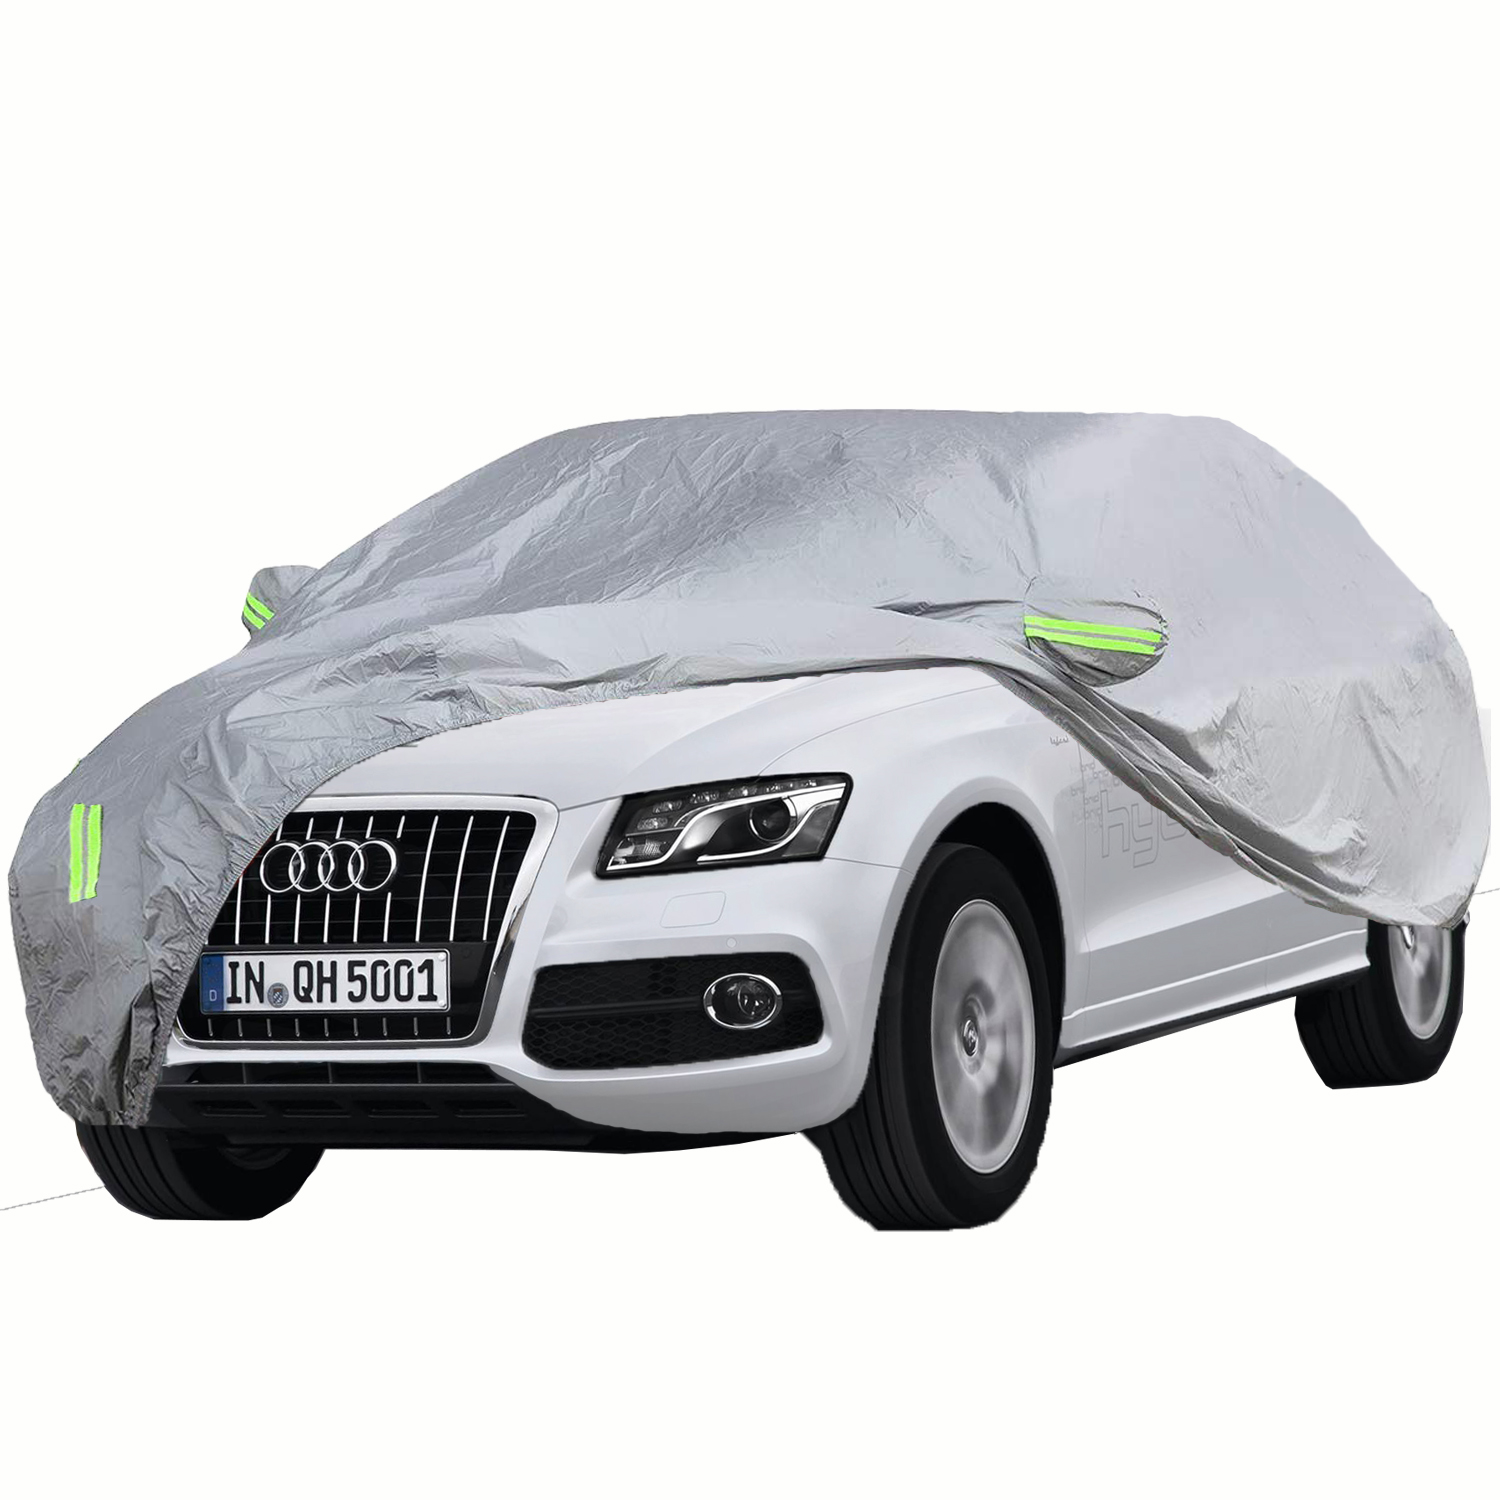 190T Universal Full SUV Cover Waterproof Dust-Proof UV Resistant Outdoor M/L